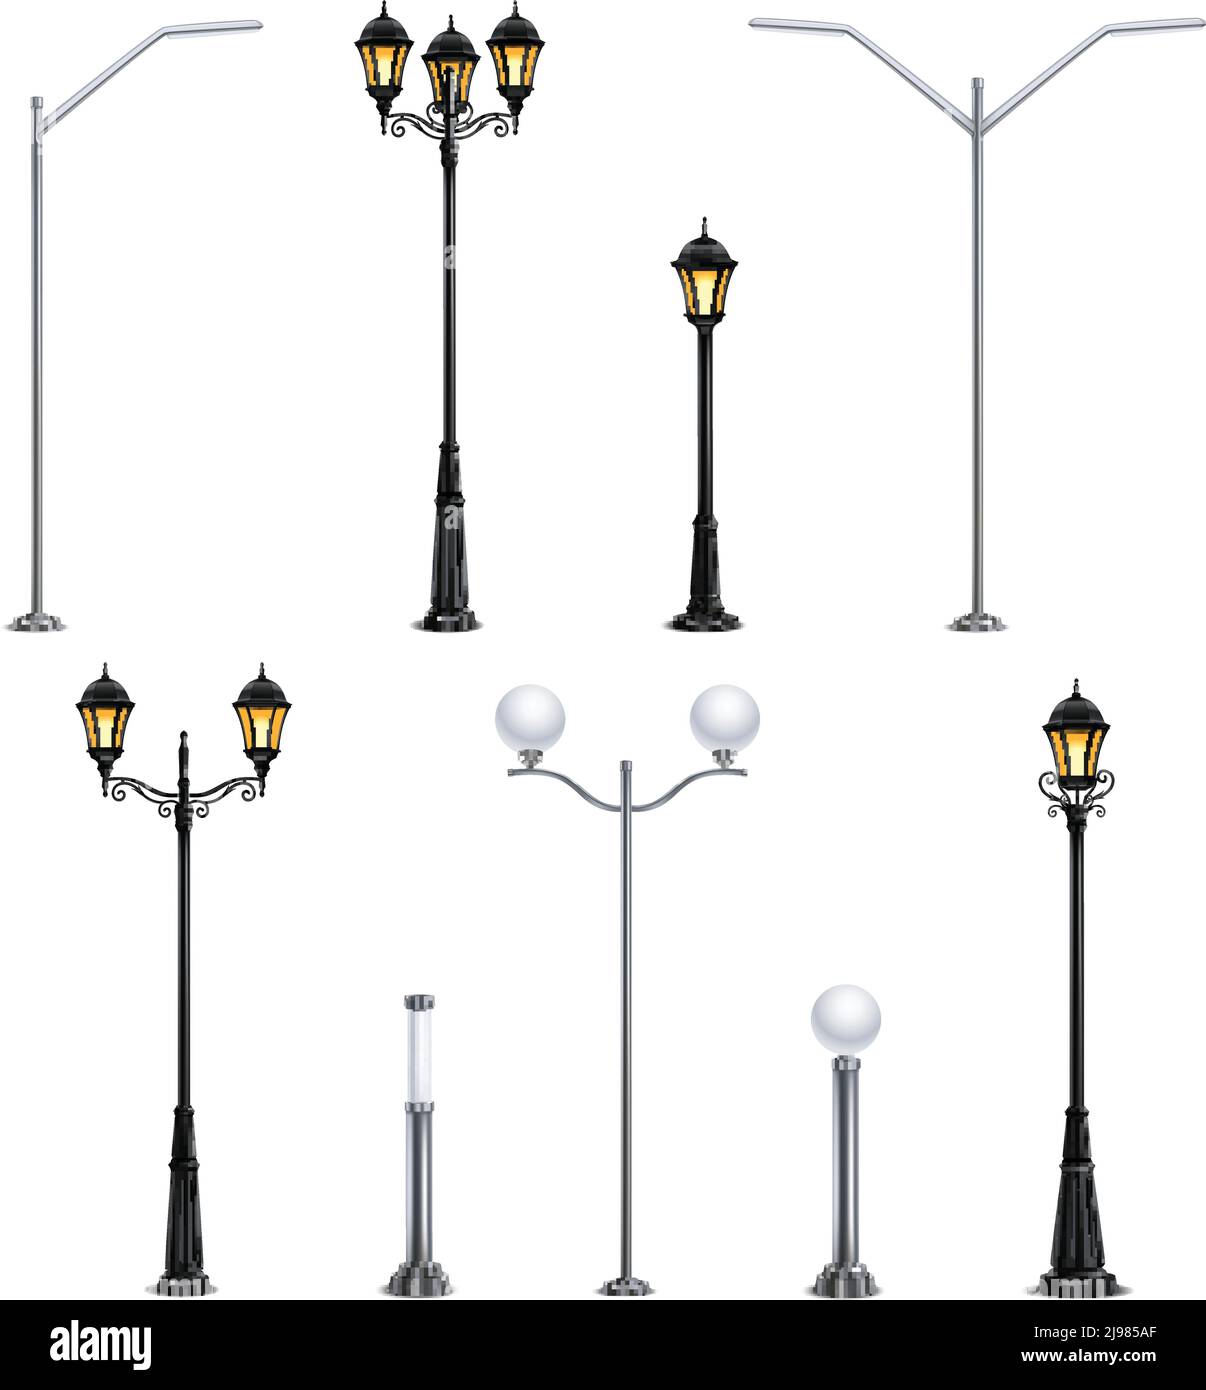 Street lights realistic icon set on white background in different styles for the city vector illustration Stock Vector